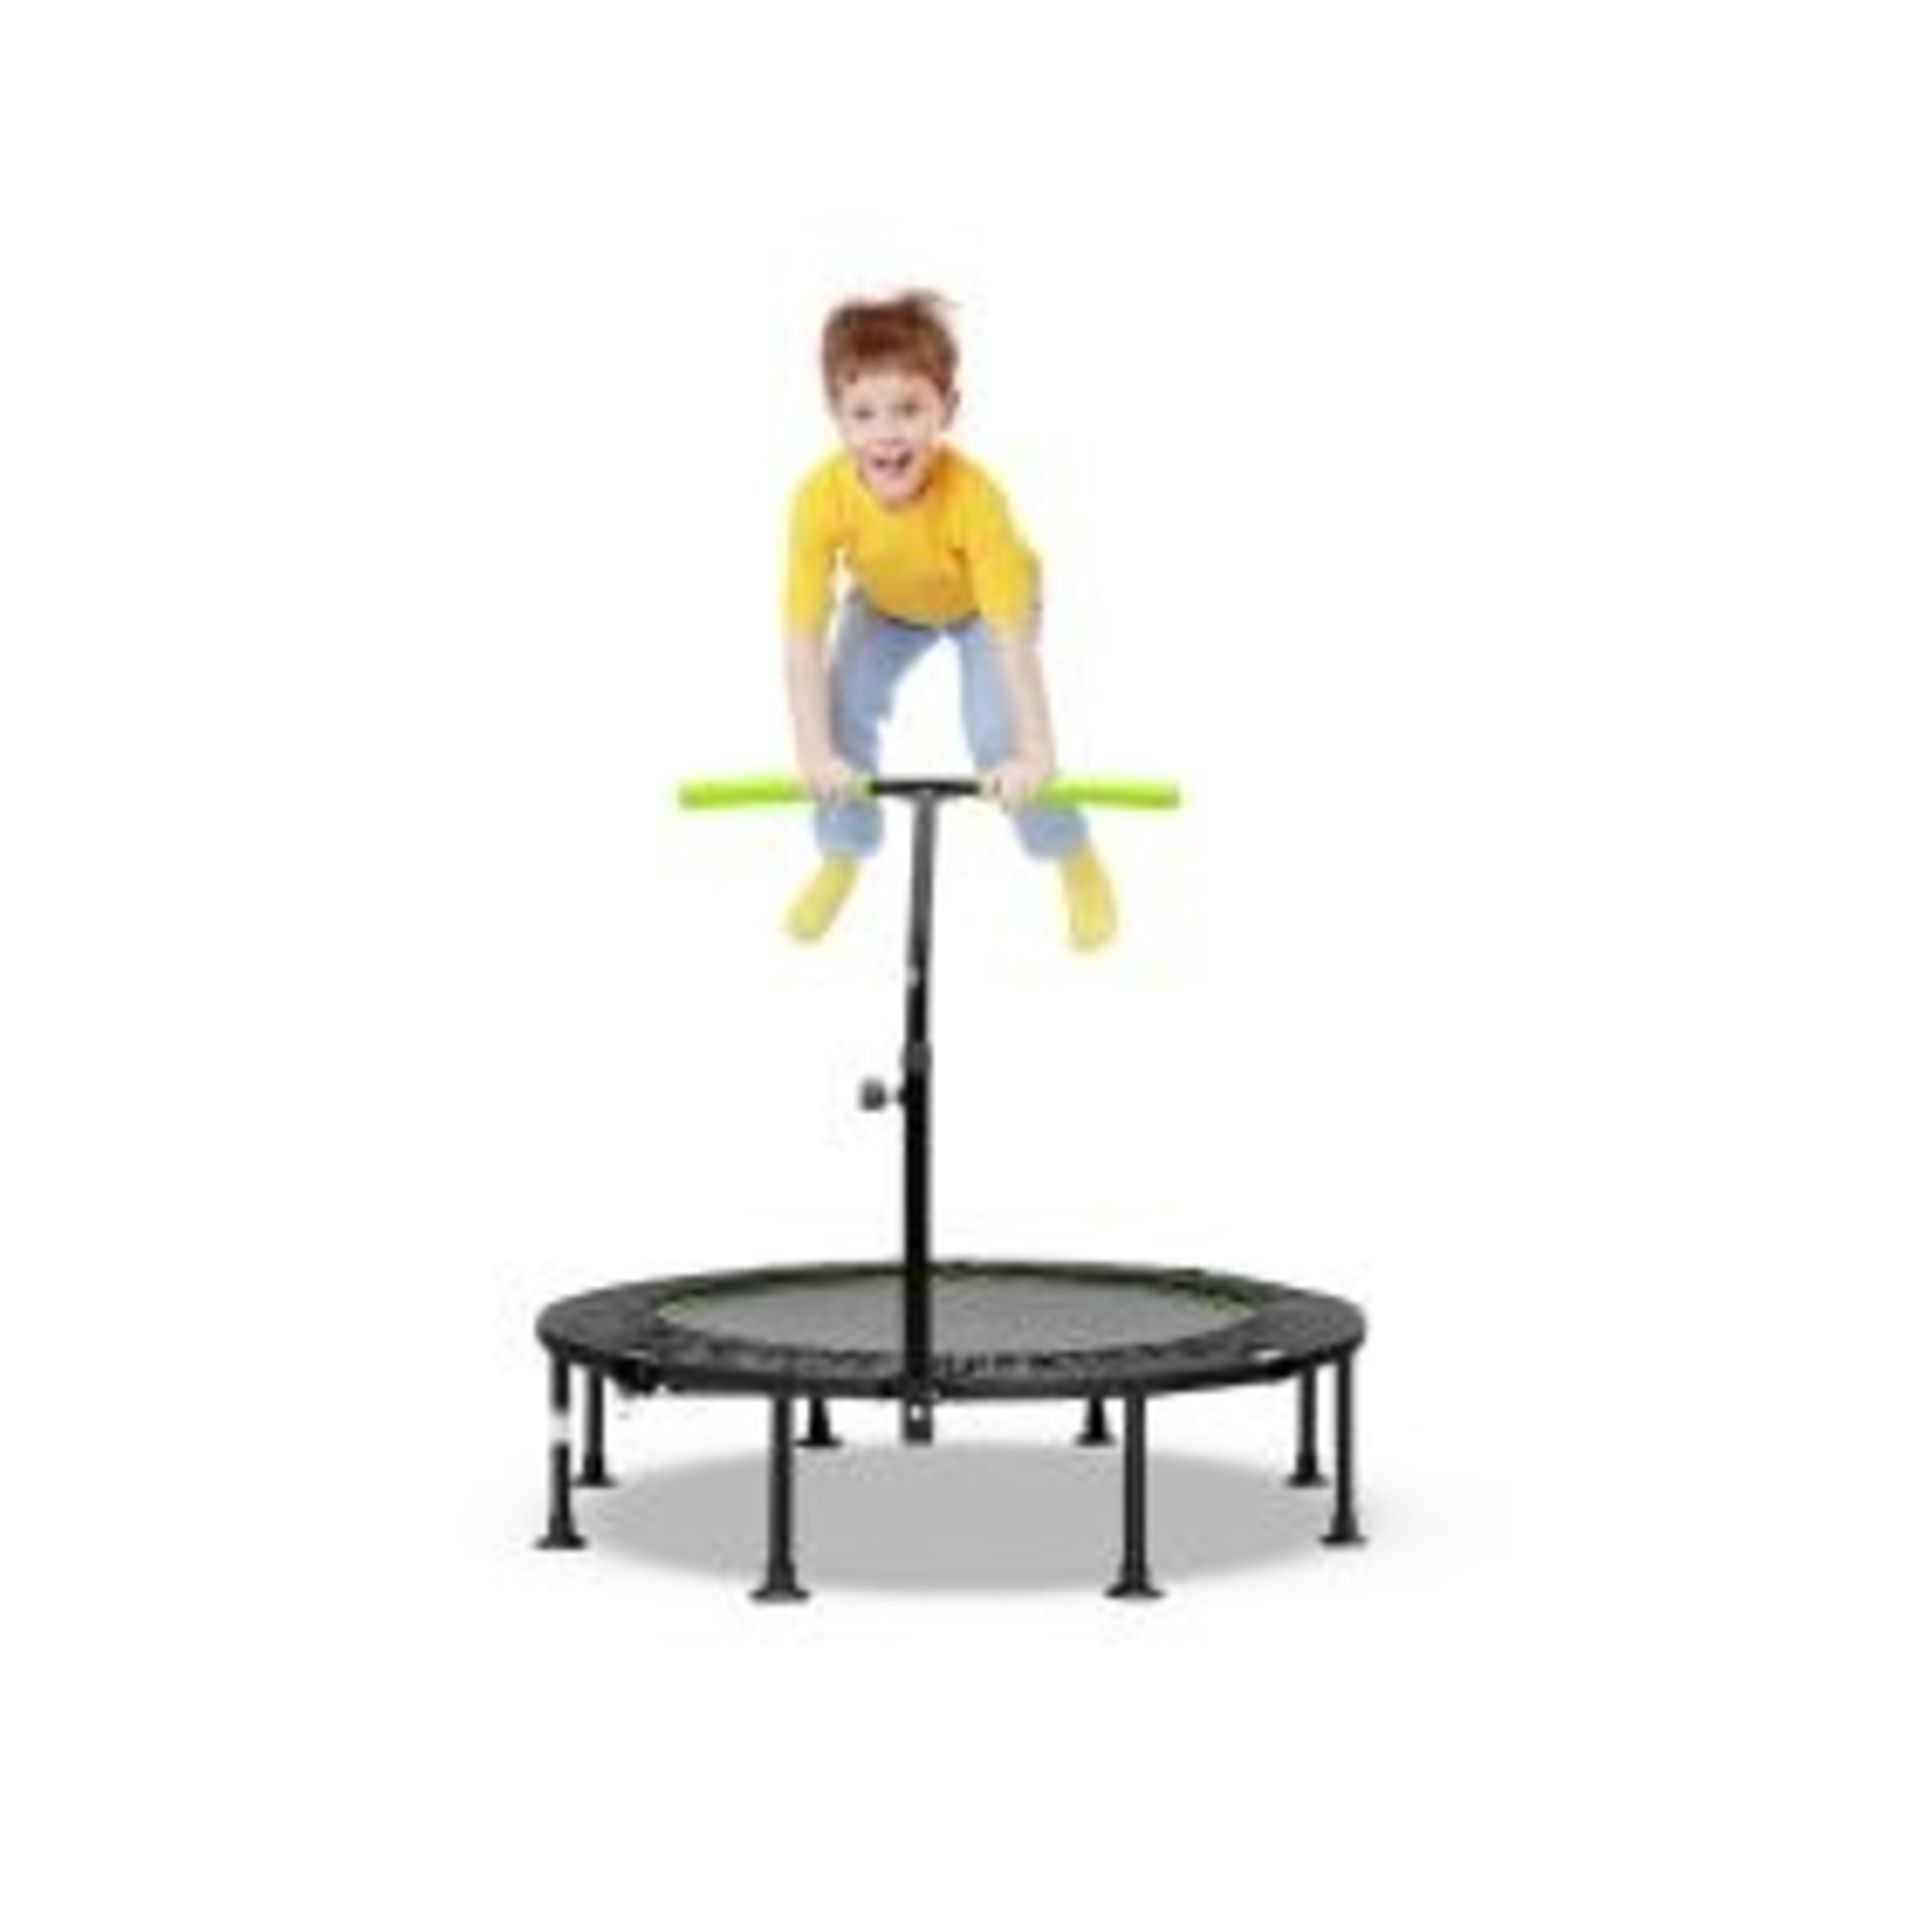 110 CM Mini Trampoline Bounce with Height Adjustable Handrail - ER53